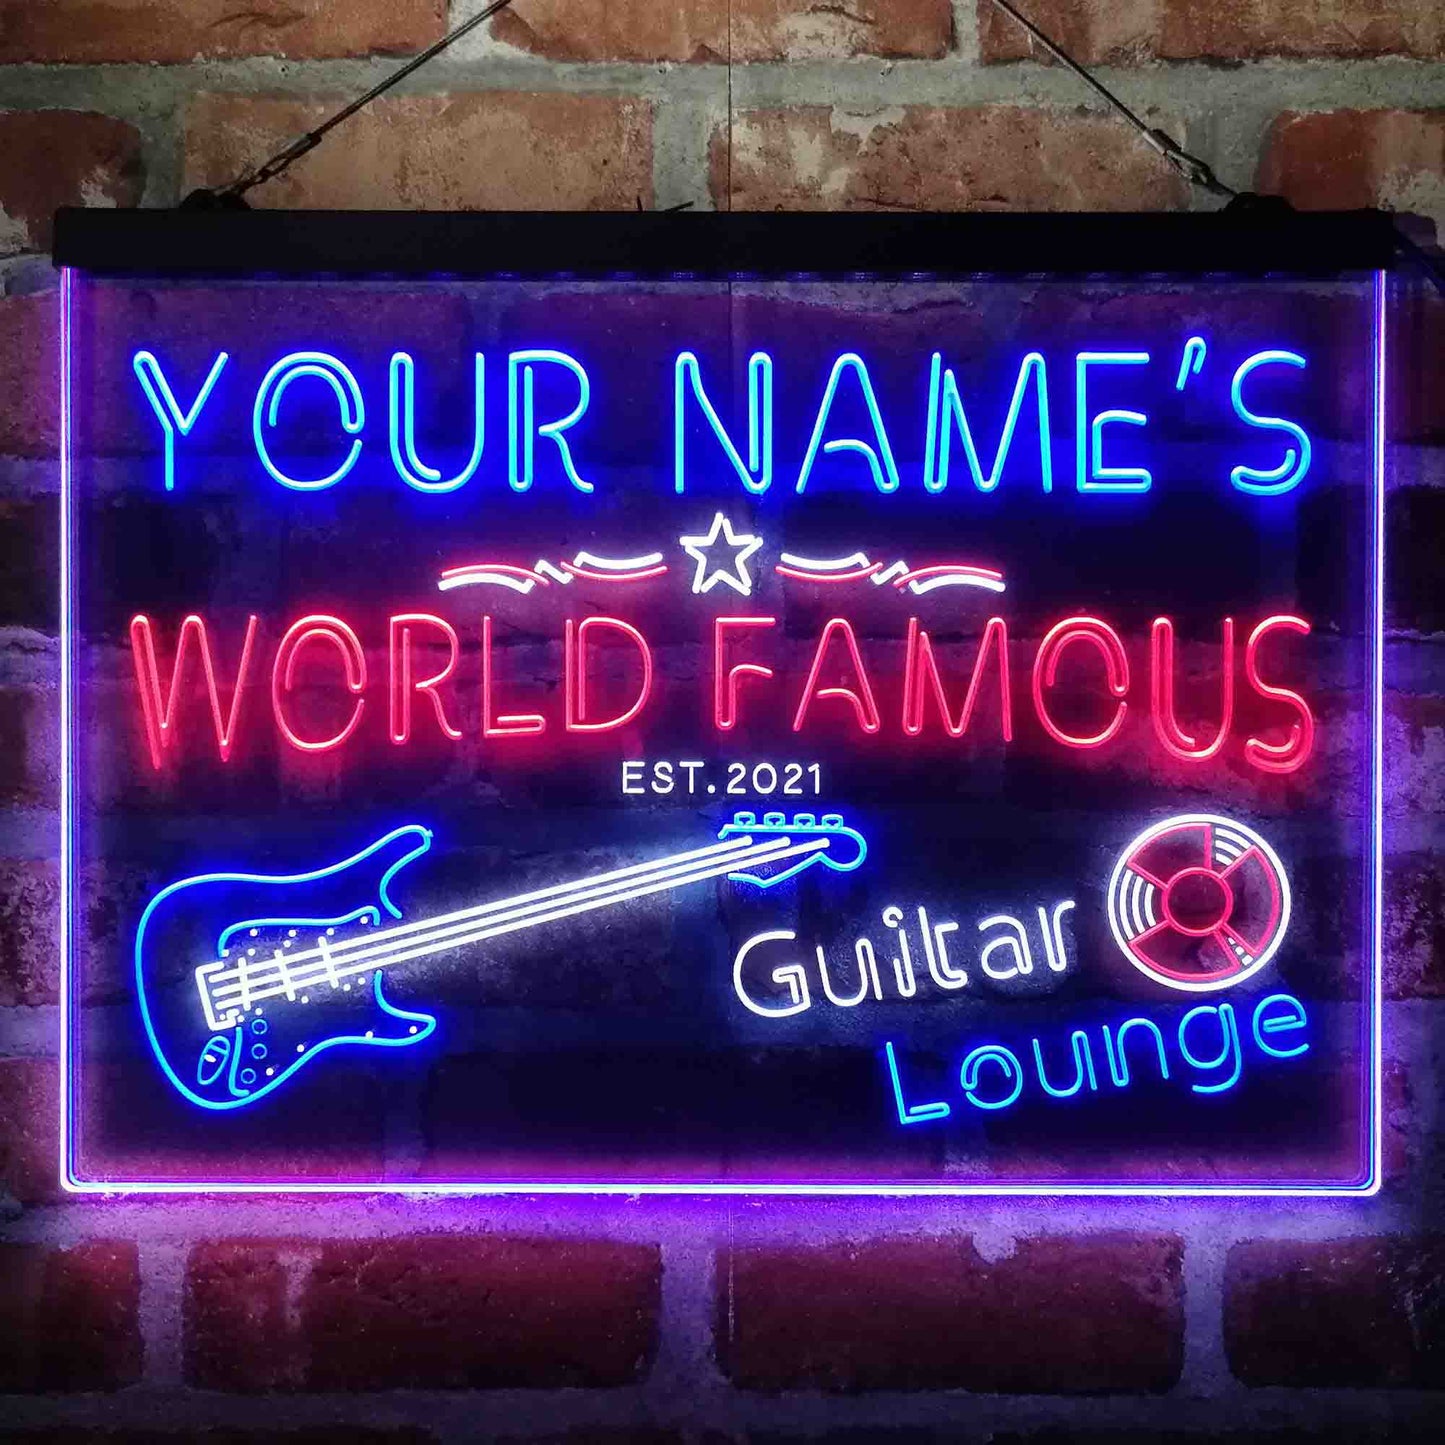 Personalized Guitar Lounge Music 3-Color LED Neon Light Sign - Way Up Gifts